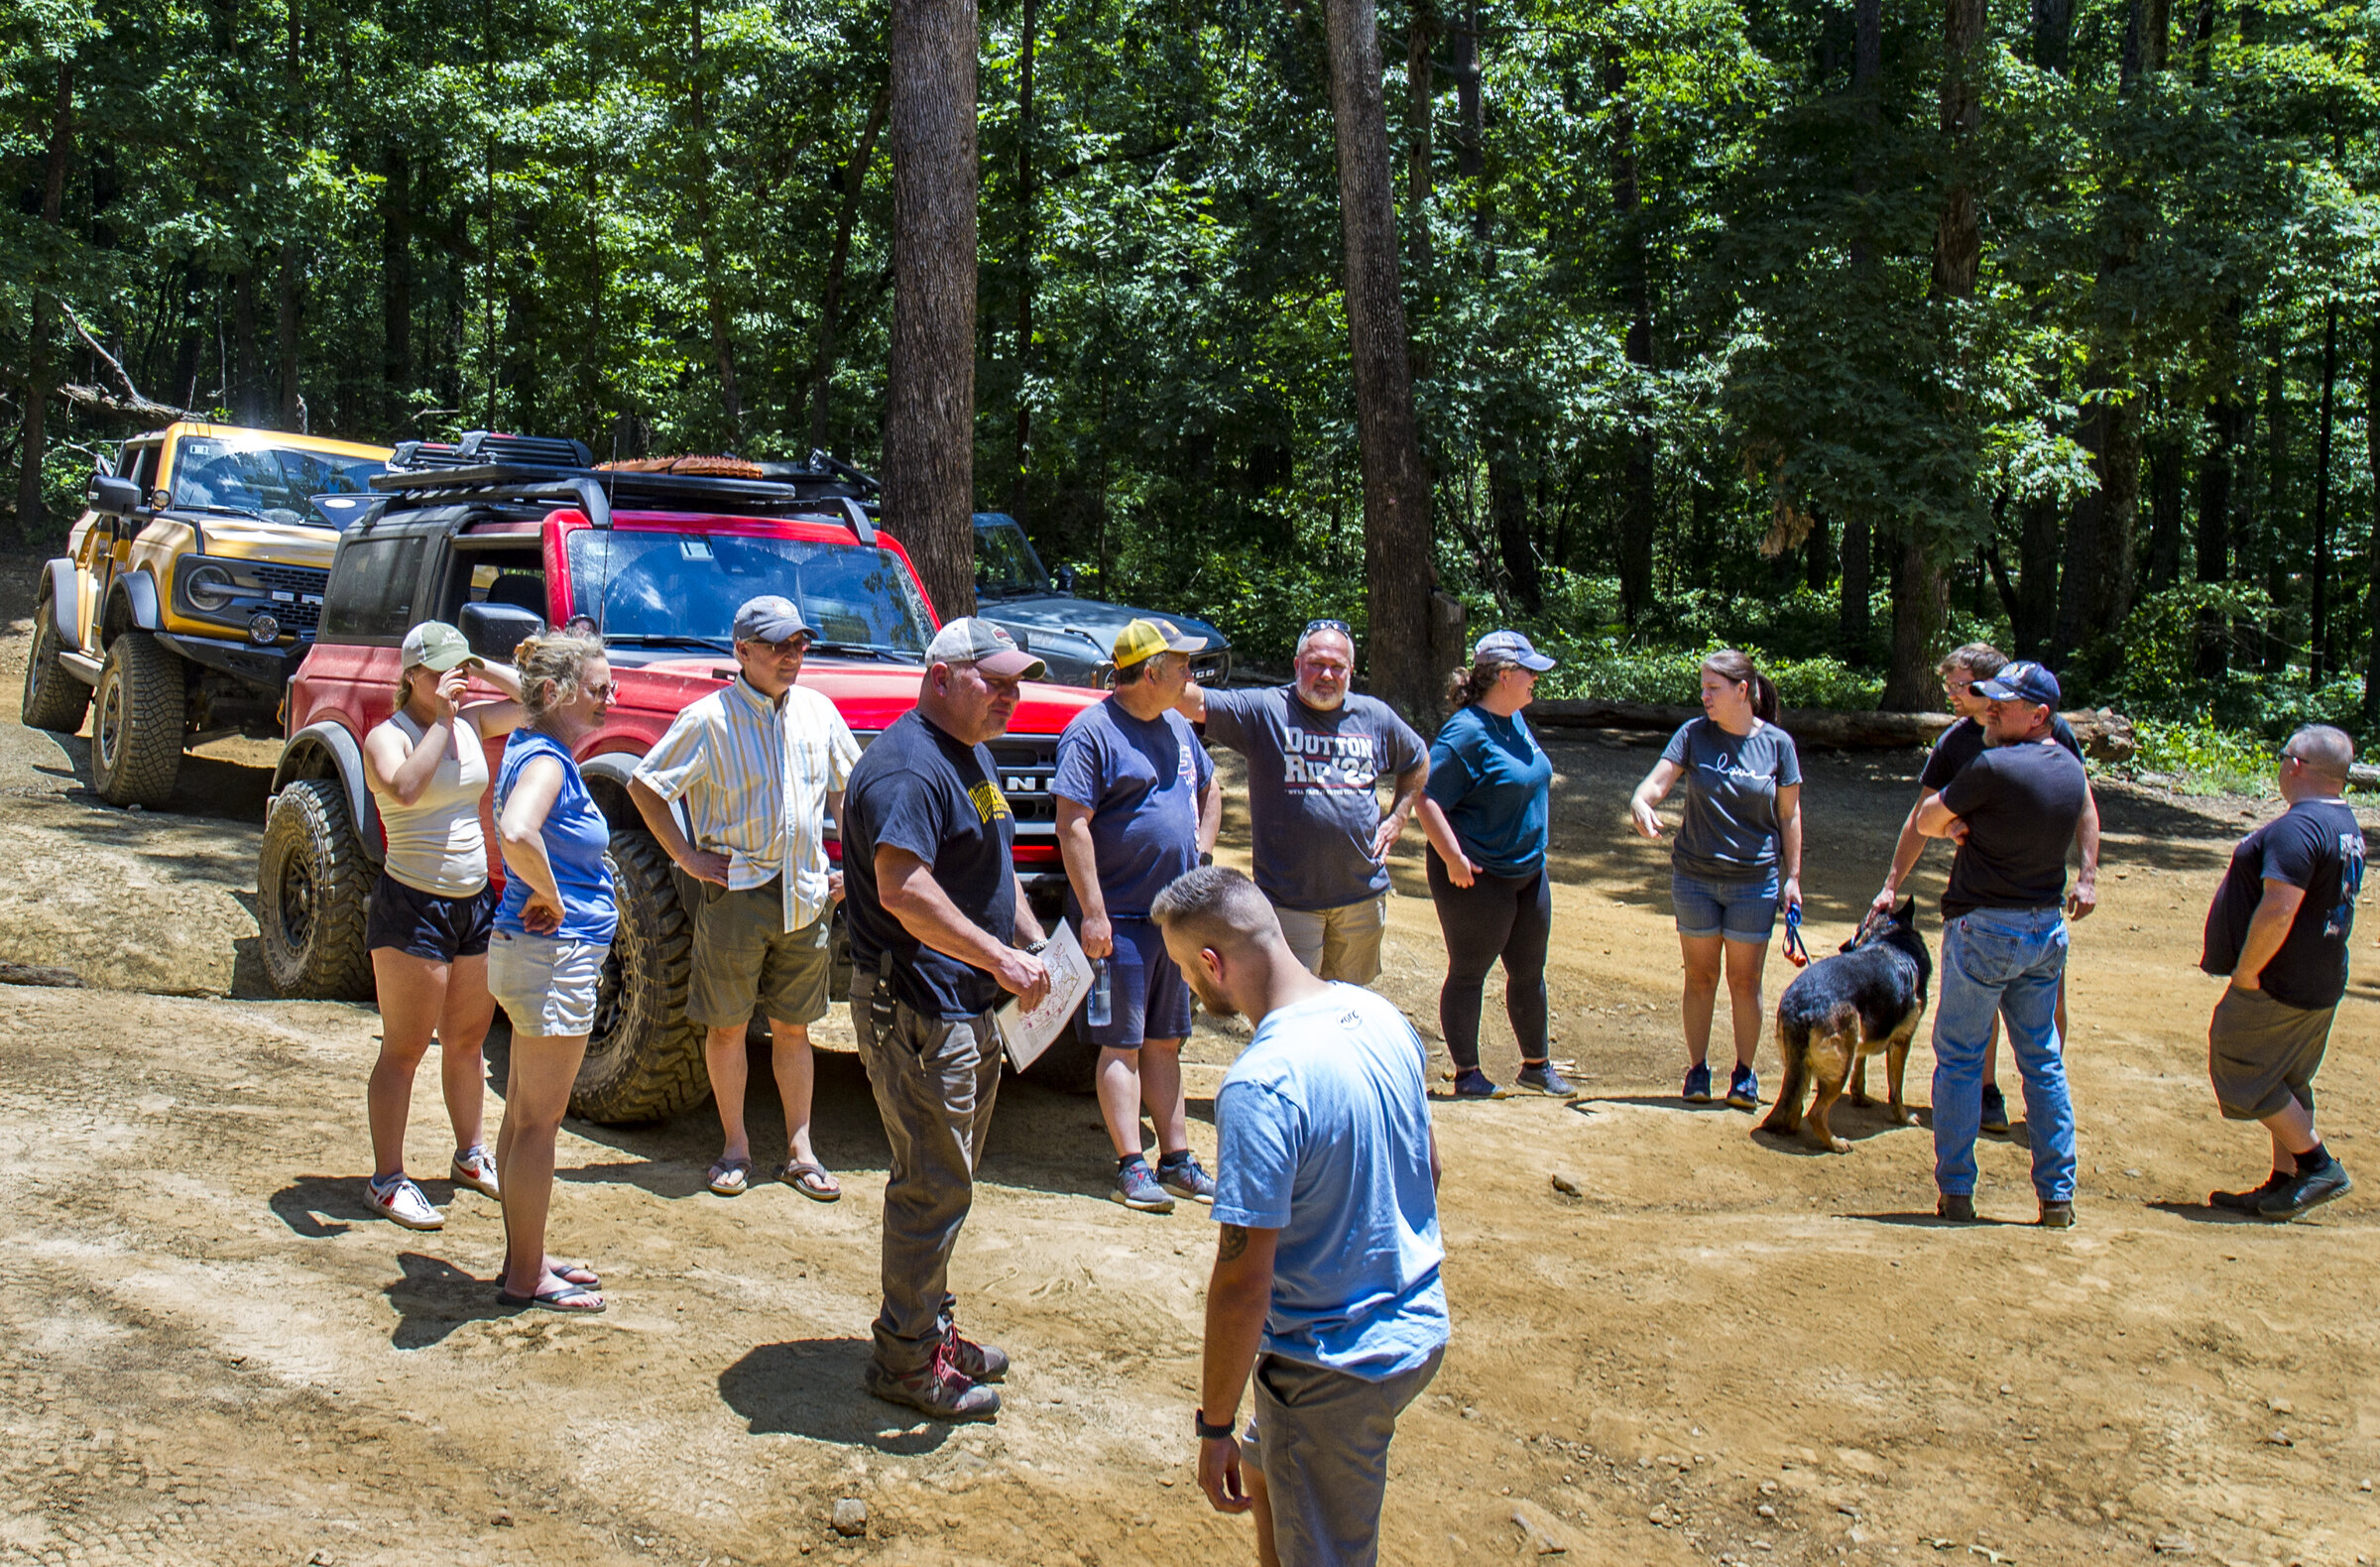 Ford Bronco Biggest Bronco day at Uwharrie National Forest yet 20220604 Uwharrie Trip w Carolina Bronco Club 7D 05 LR